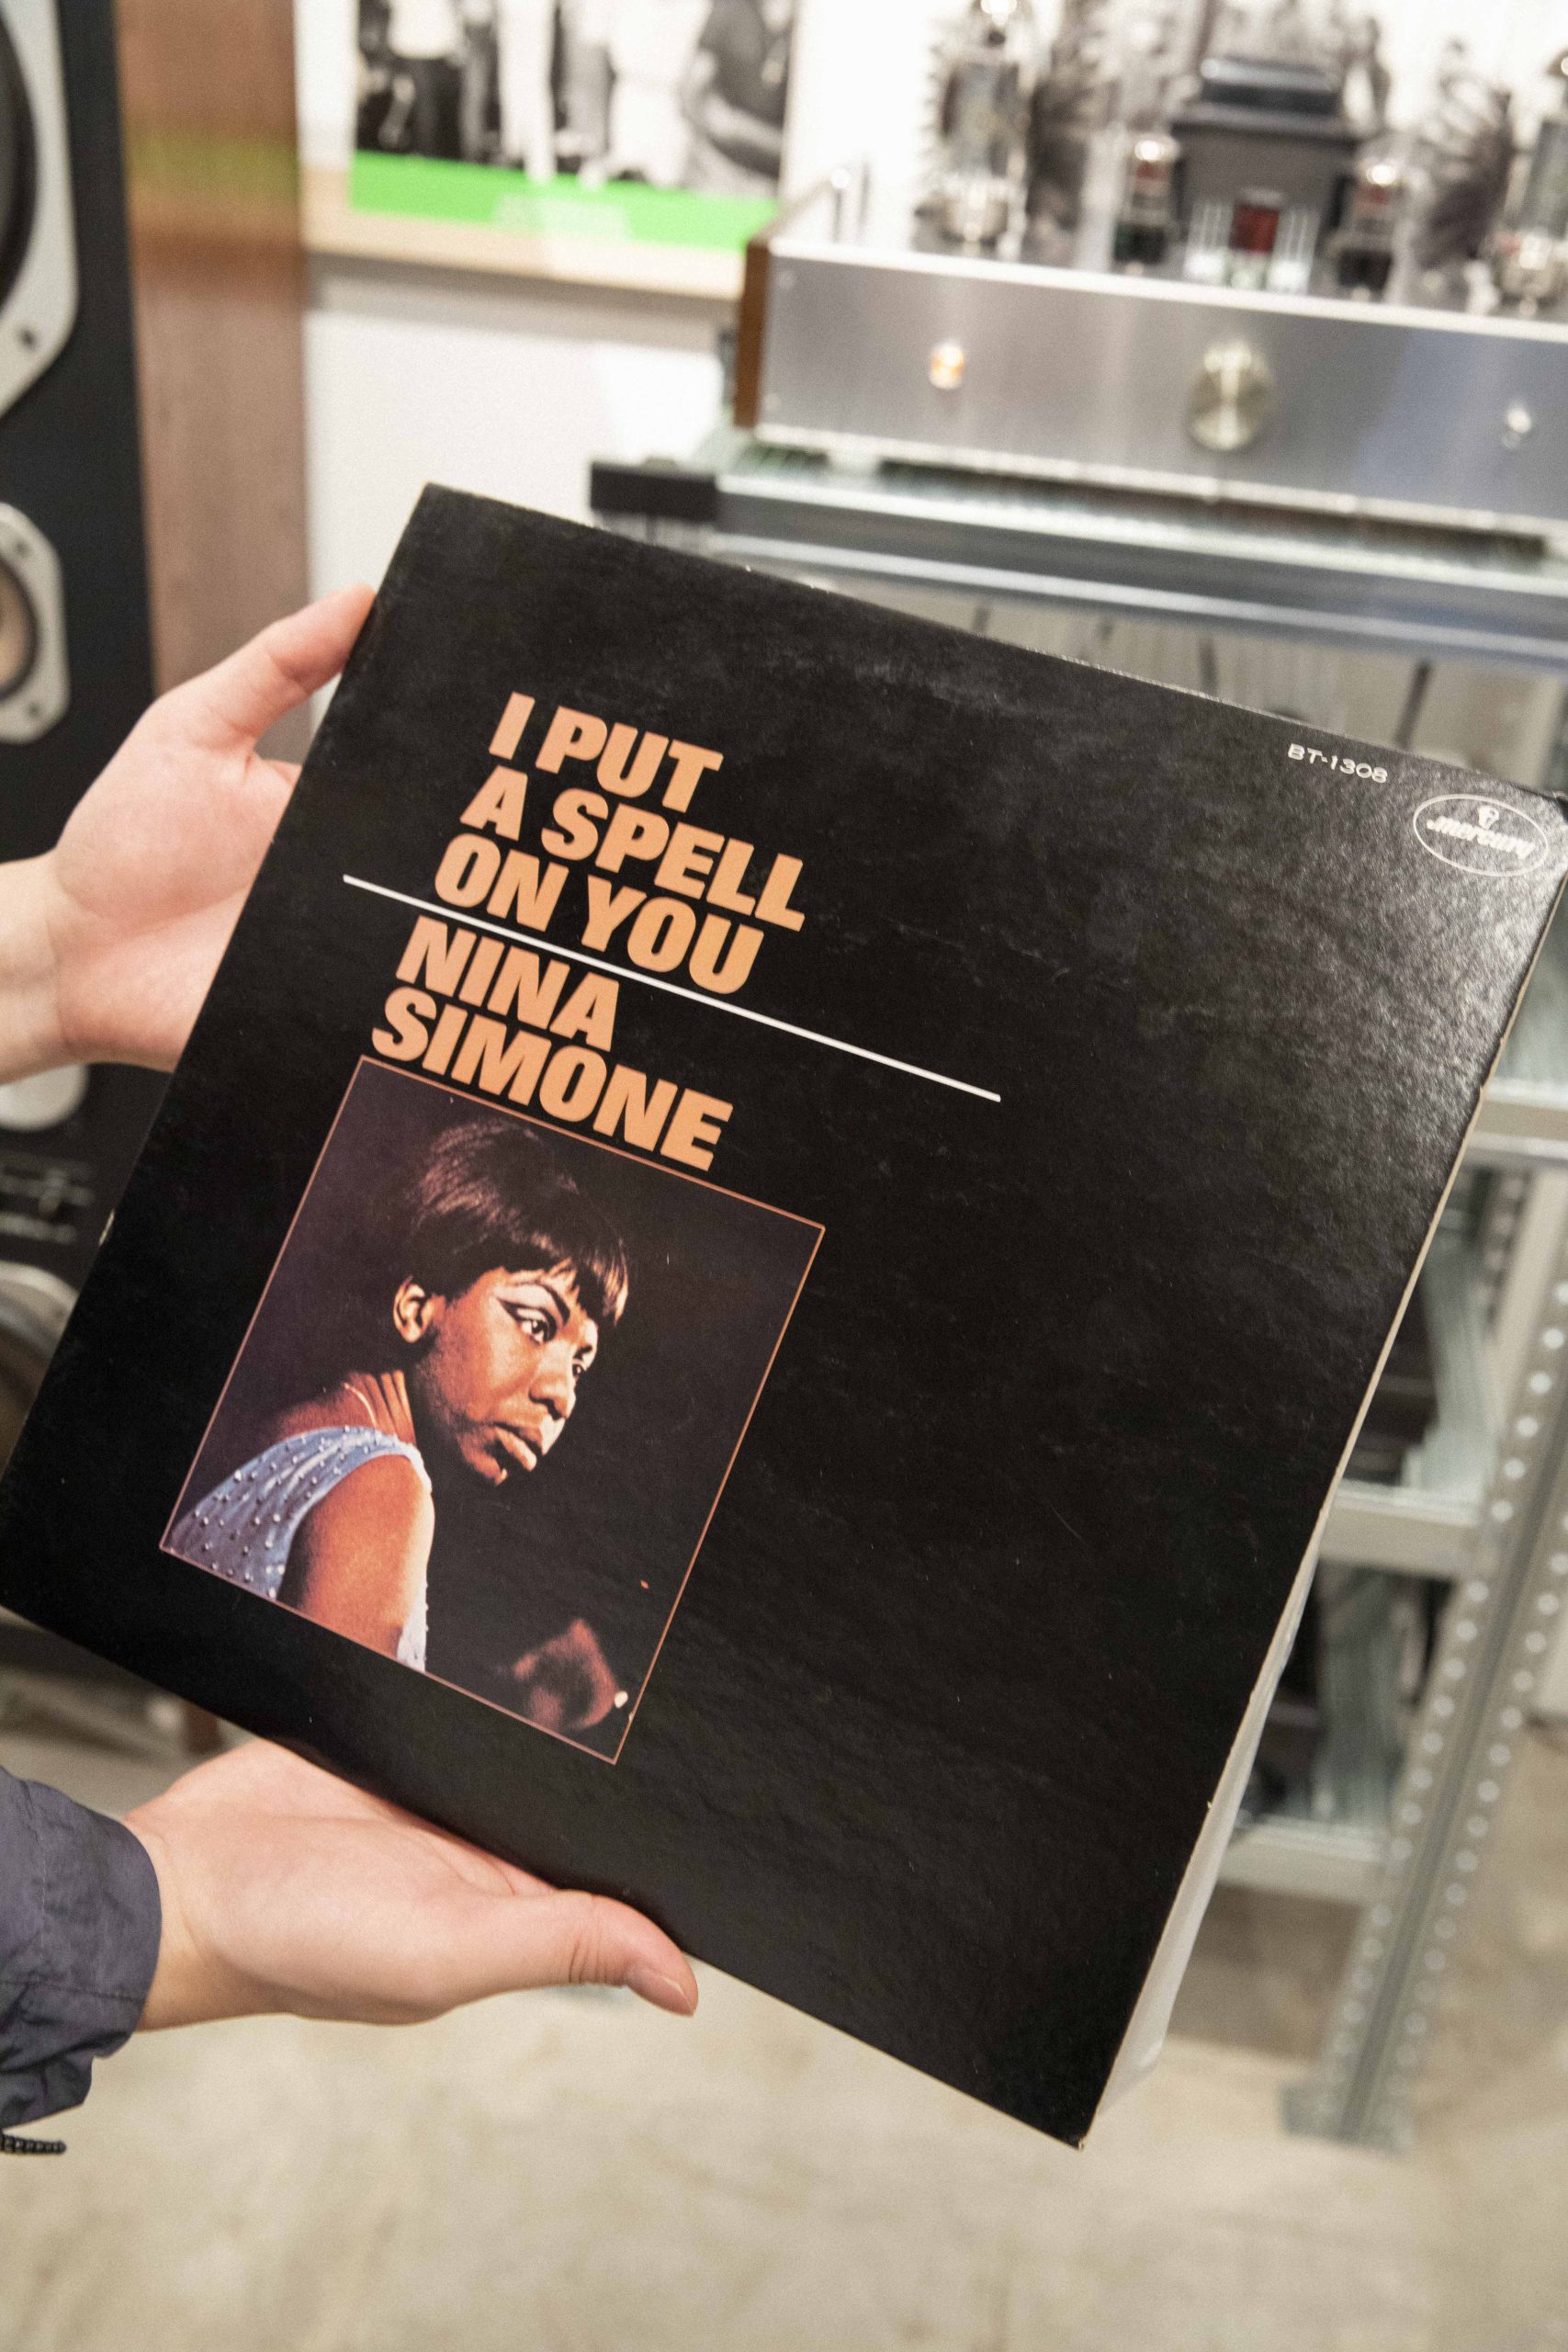 Nina Simone's 1965 album I Put a Spell on You, which includes "July Tree"